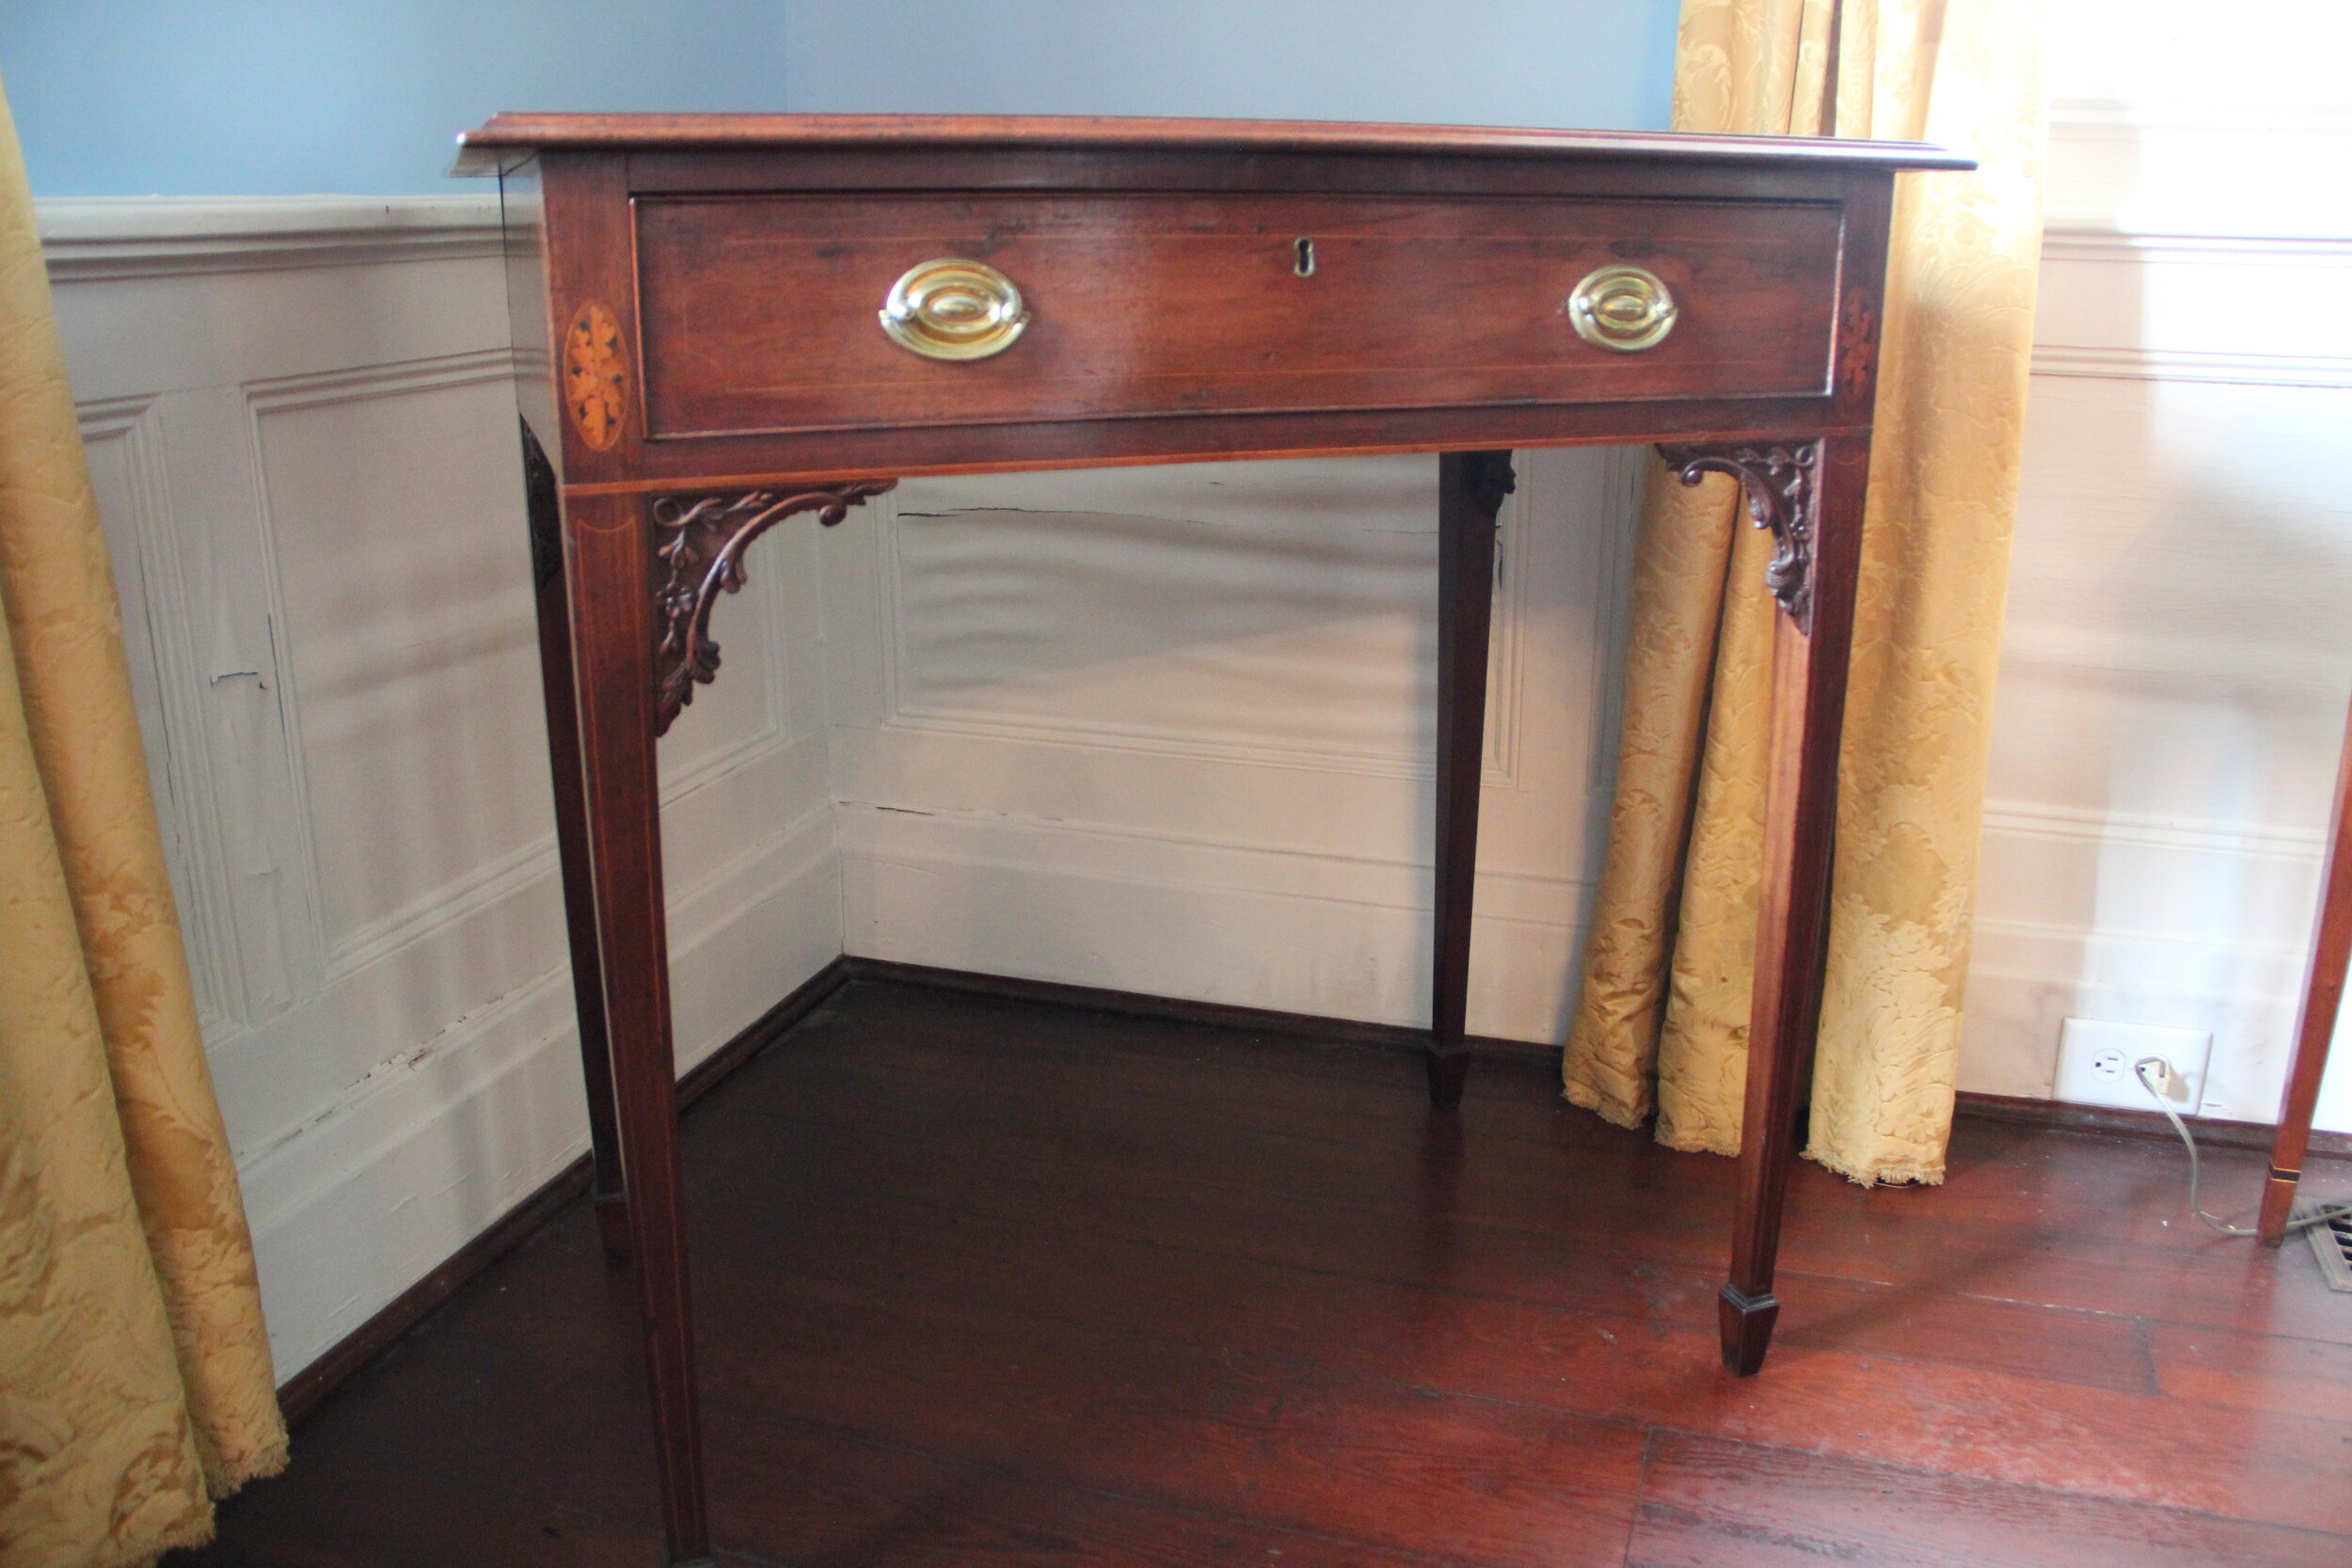 Table made in Charleston, SC c. 1785-1790